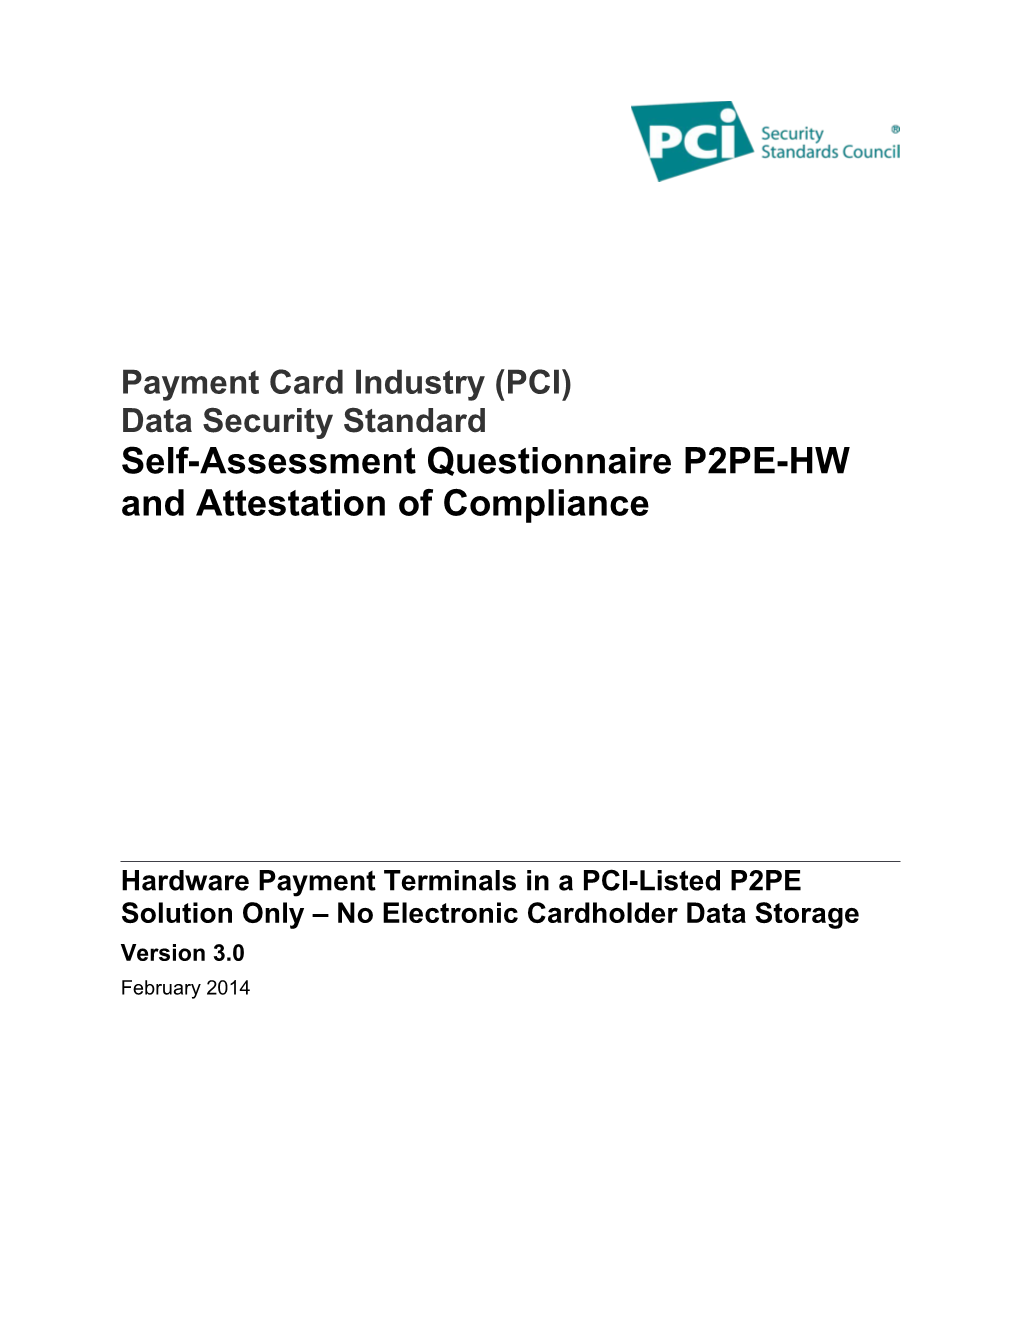 Hardware Payment Terminals in a PCI-Listed P2PE Solution Only No Electronic Cardholder